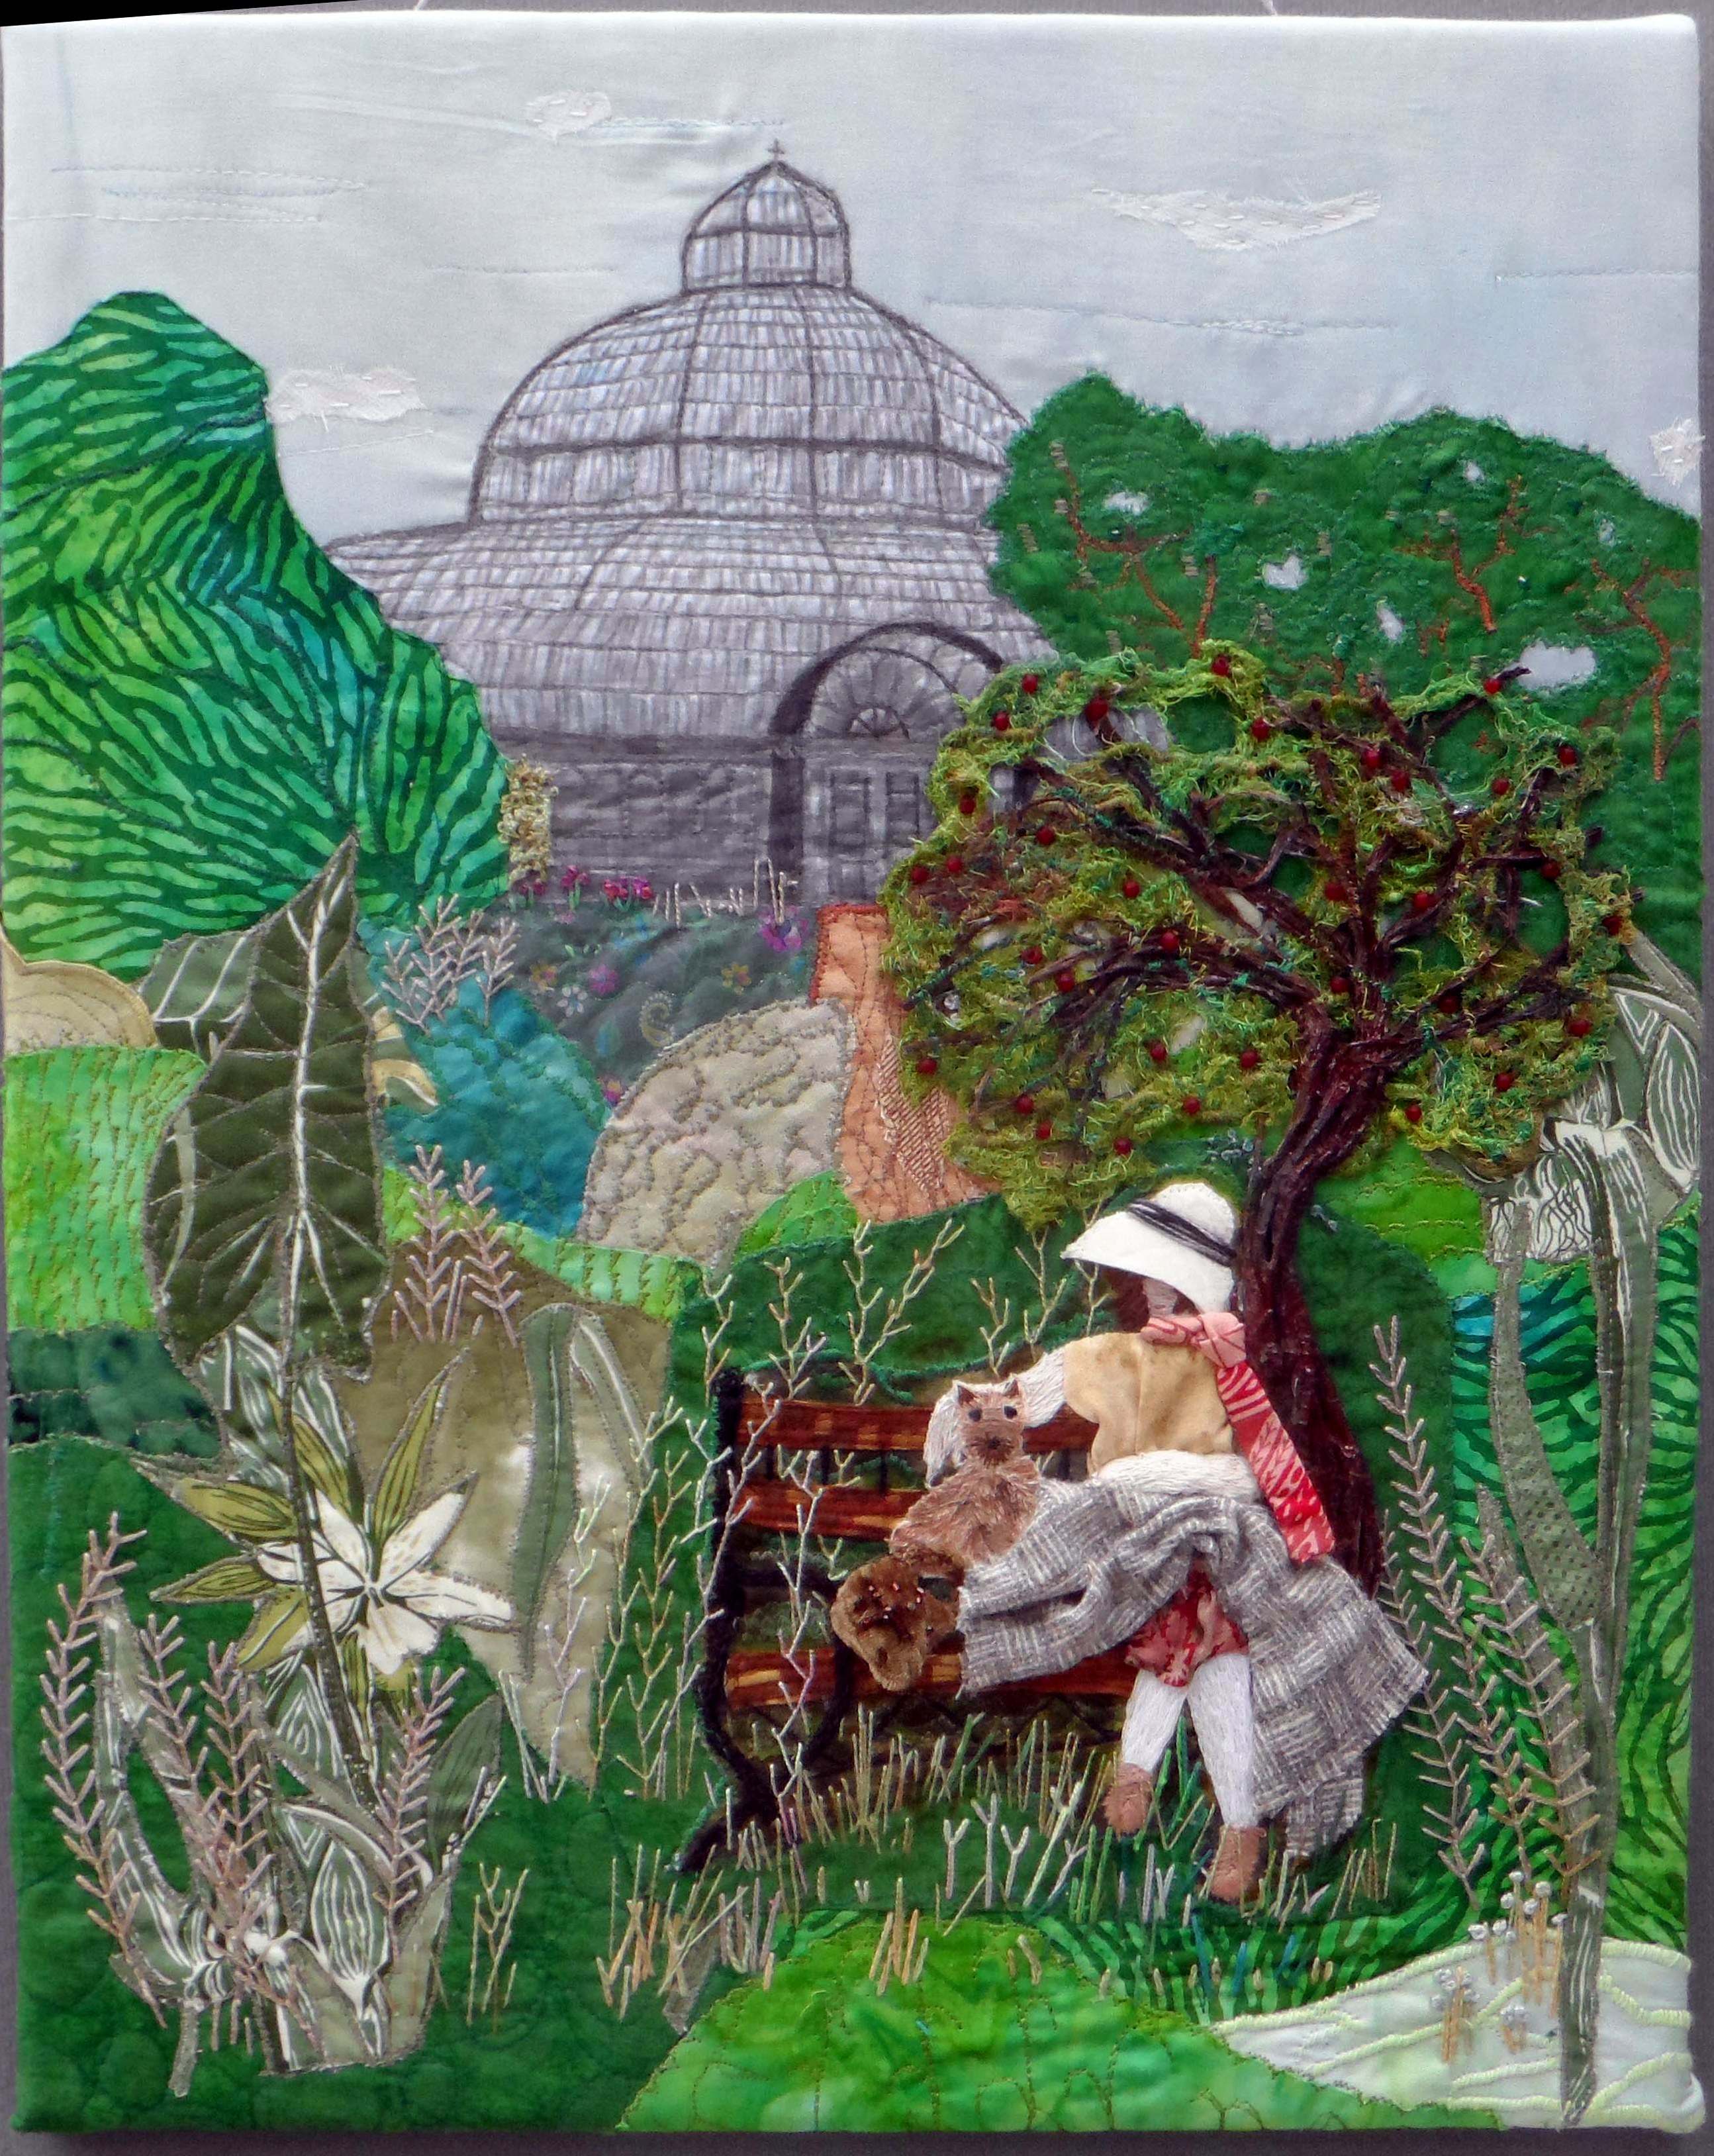 A WALK IN THE PARK by Mal Ralston, applique with hand and machine embroidery, Contemporary Threads exhibition, Sefton Palm House, Feb 2022